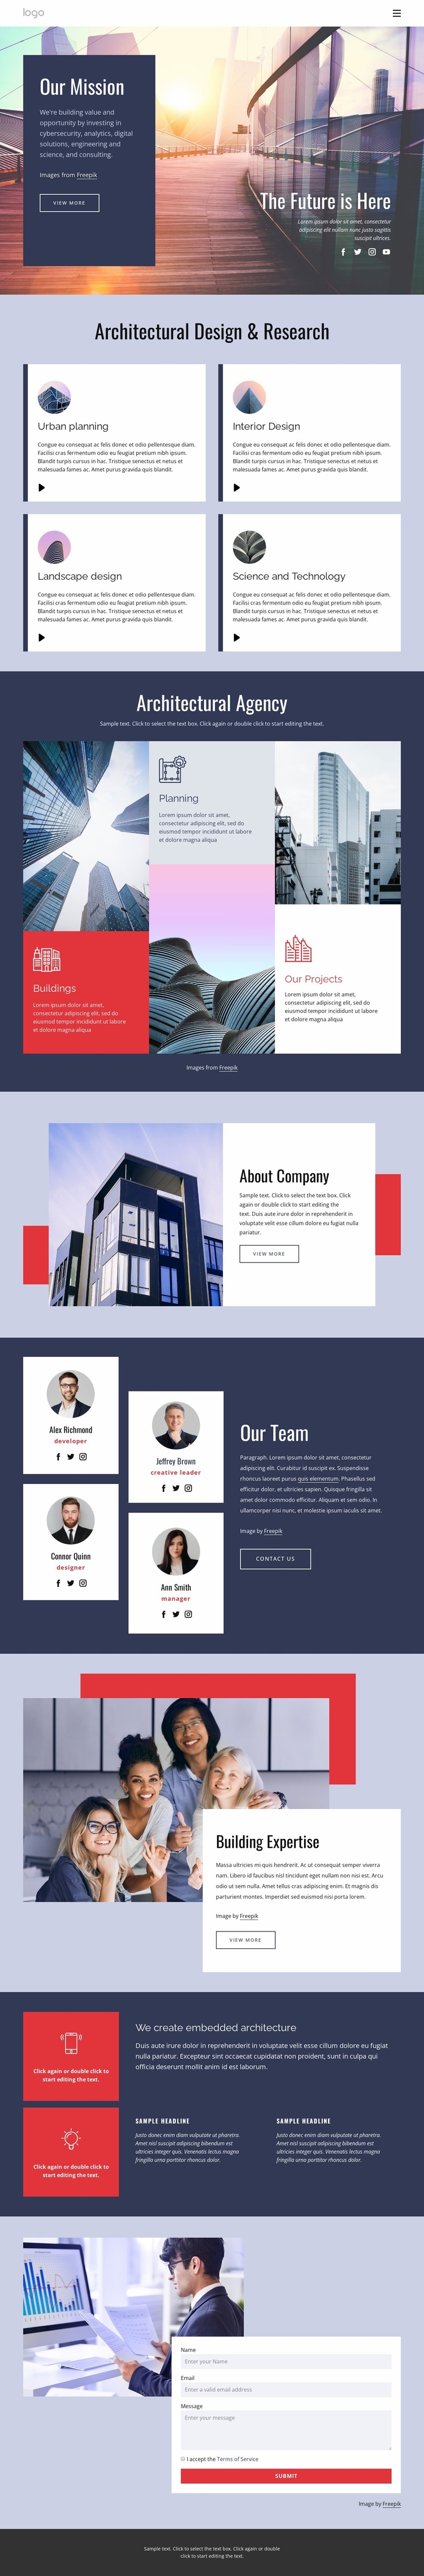 Dynamic architectural design Website Template